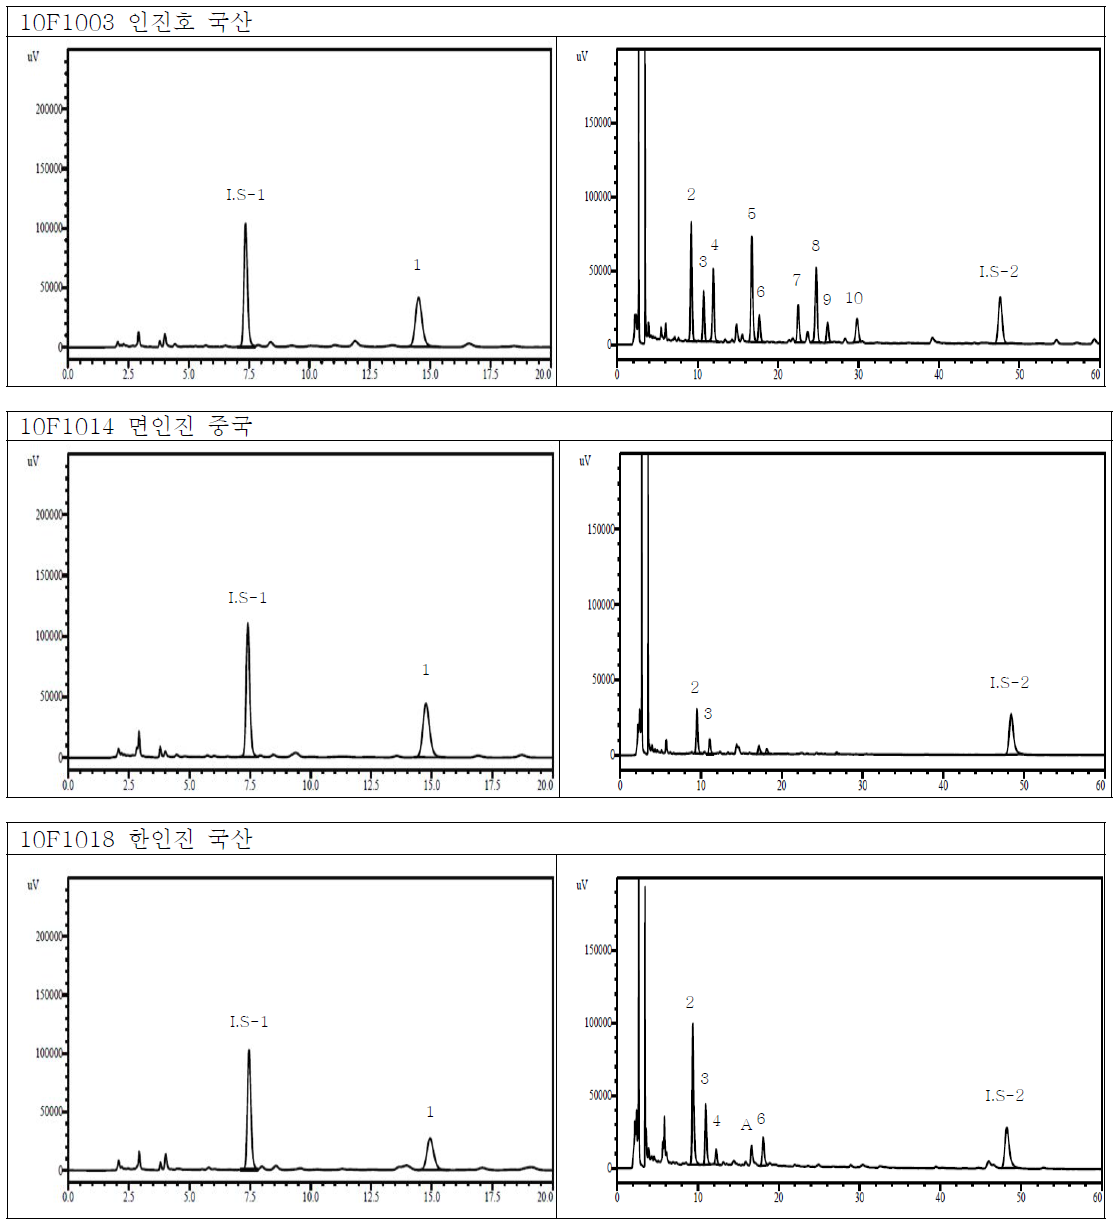 HPLC chromatograms of reference sample extracts.